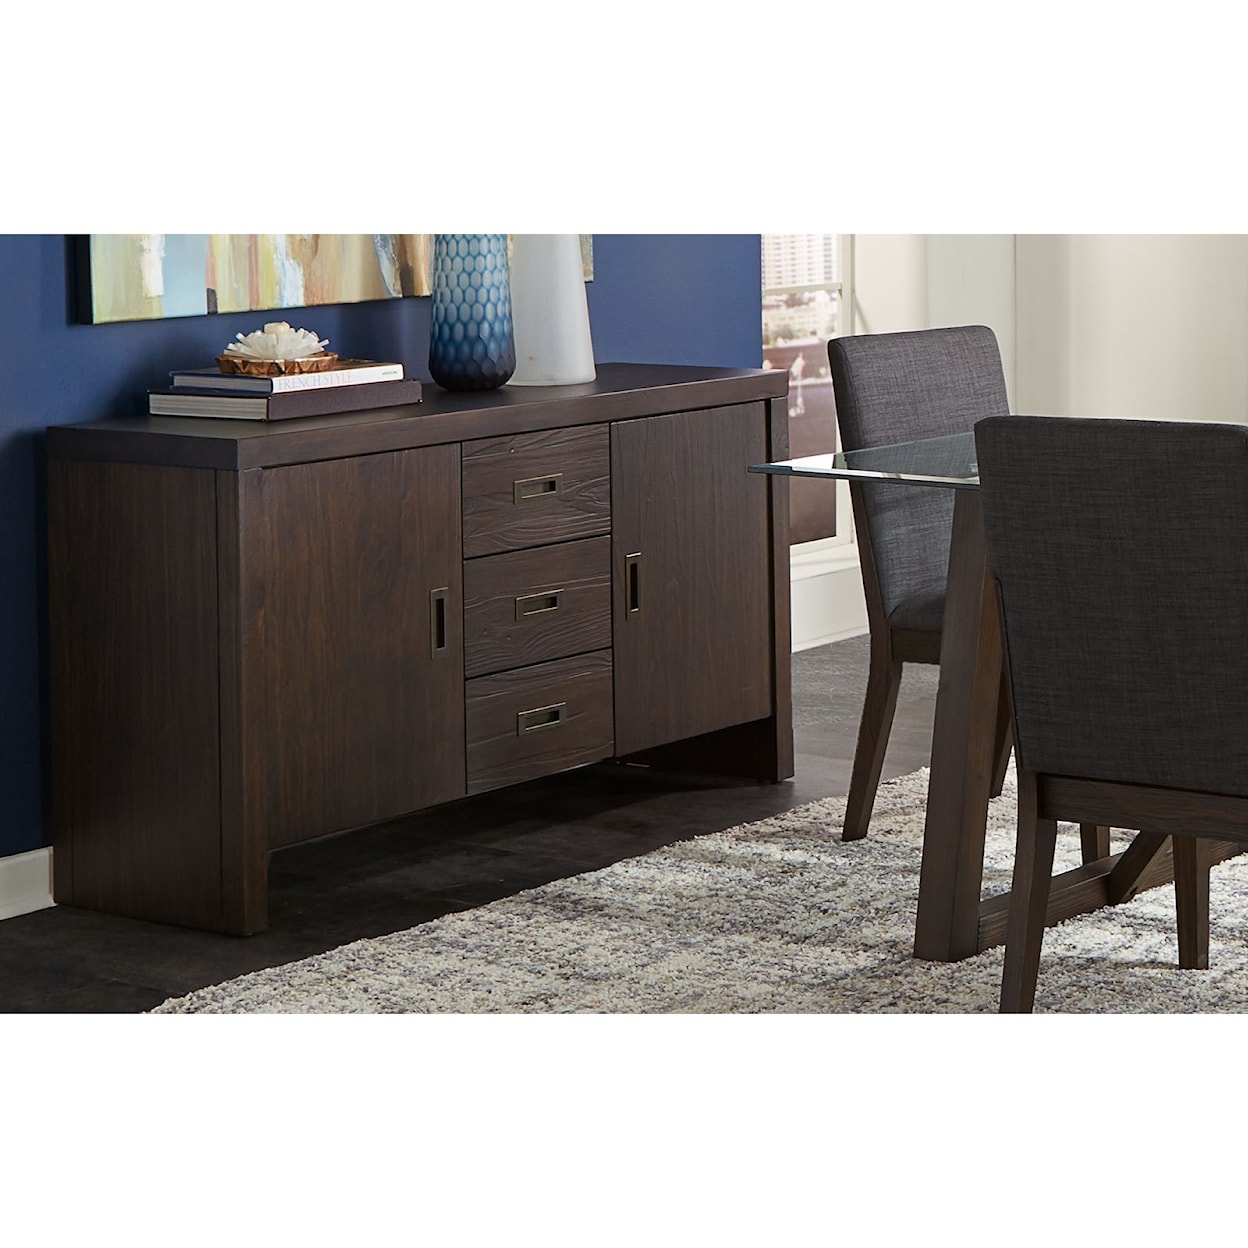 AAmerica Palm Canyon Sideboard